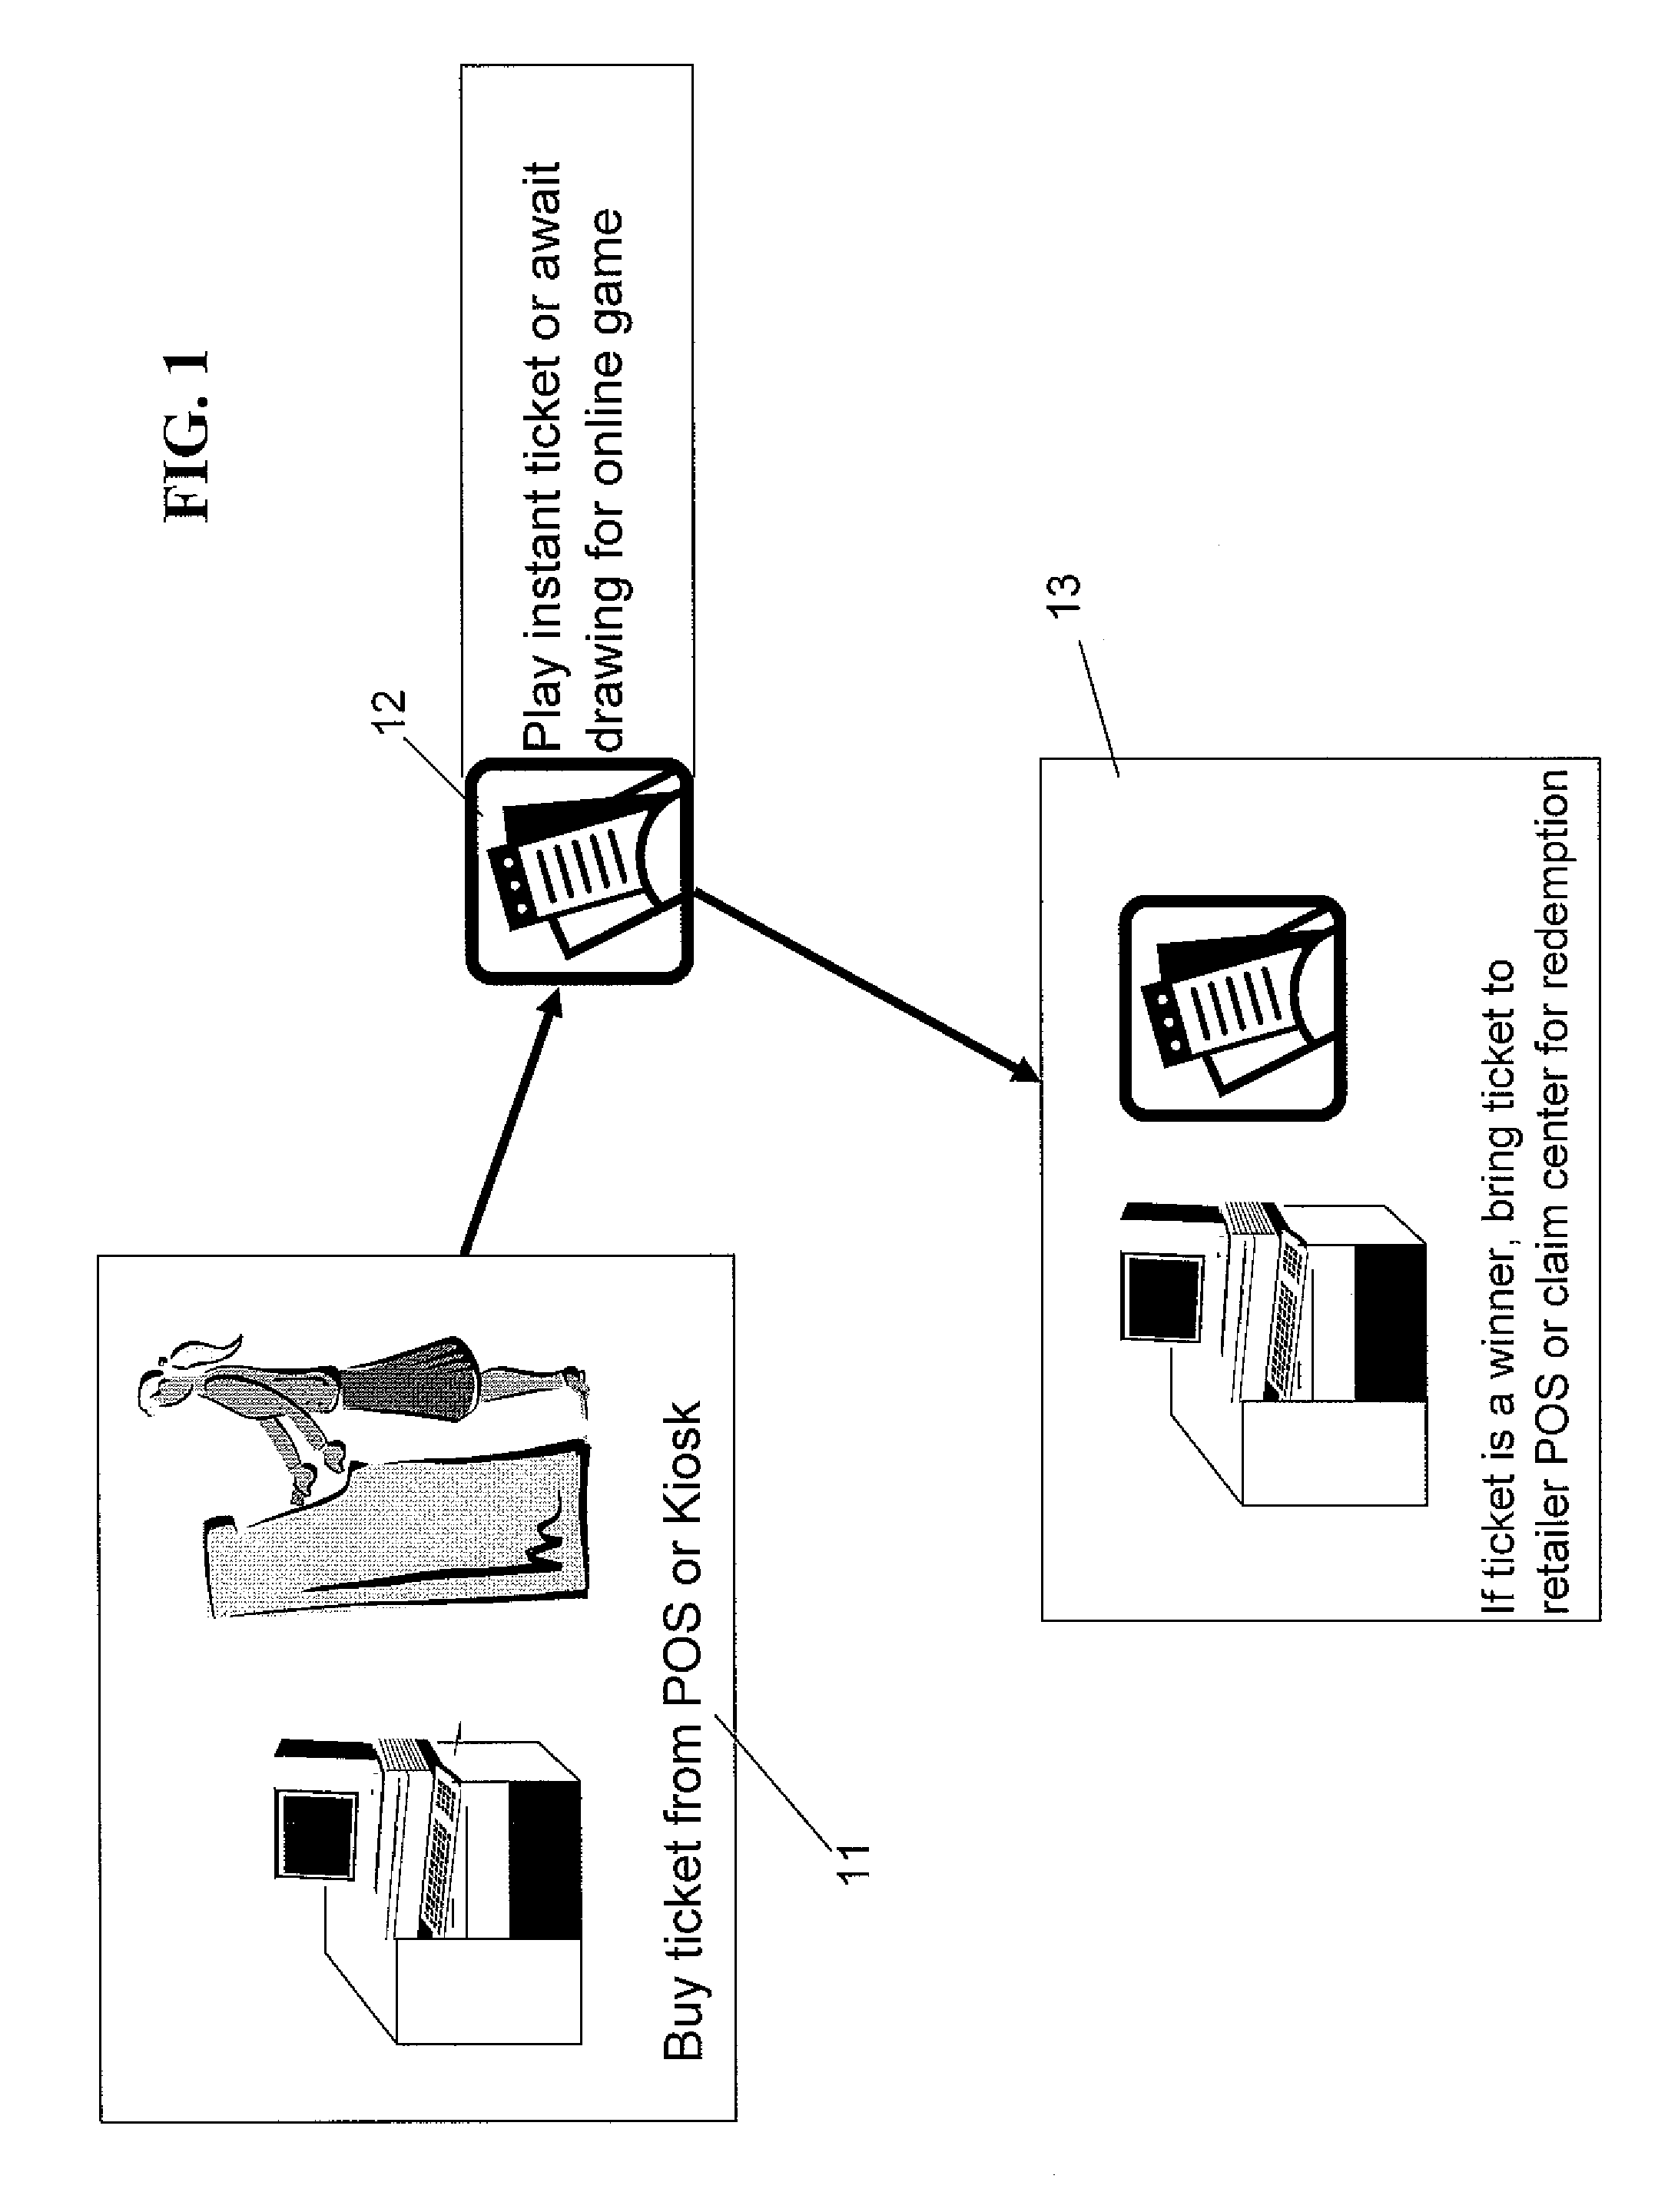 System, device and method for paperless wagering and payment of winnings